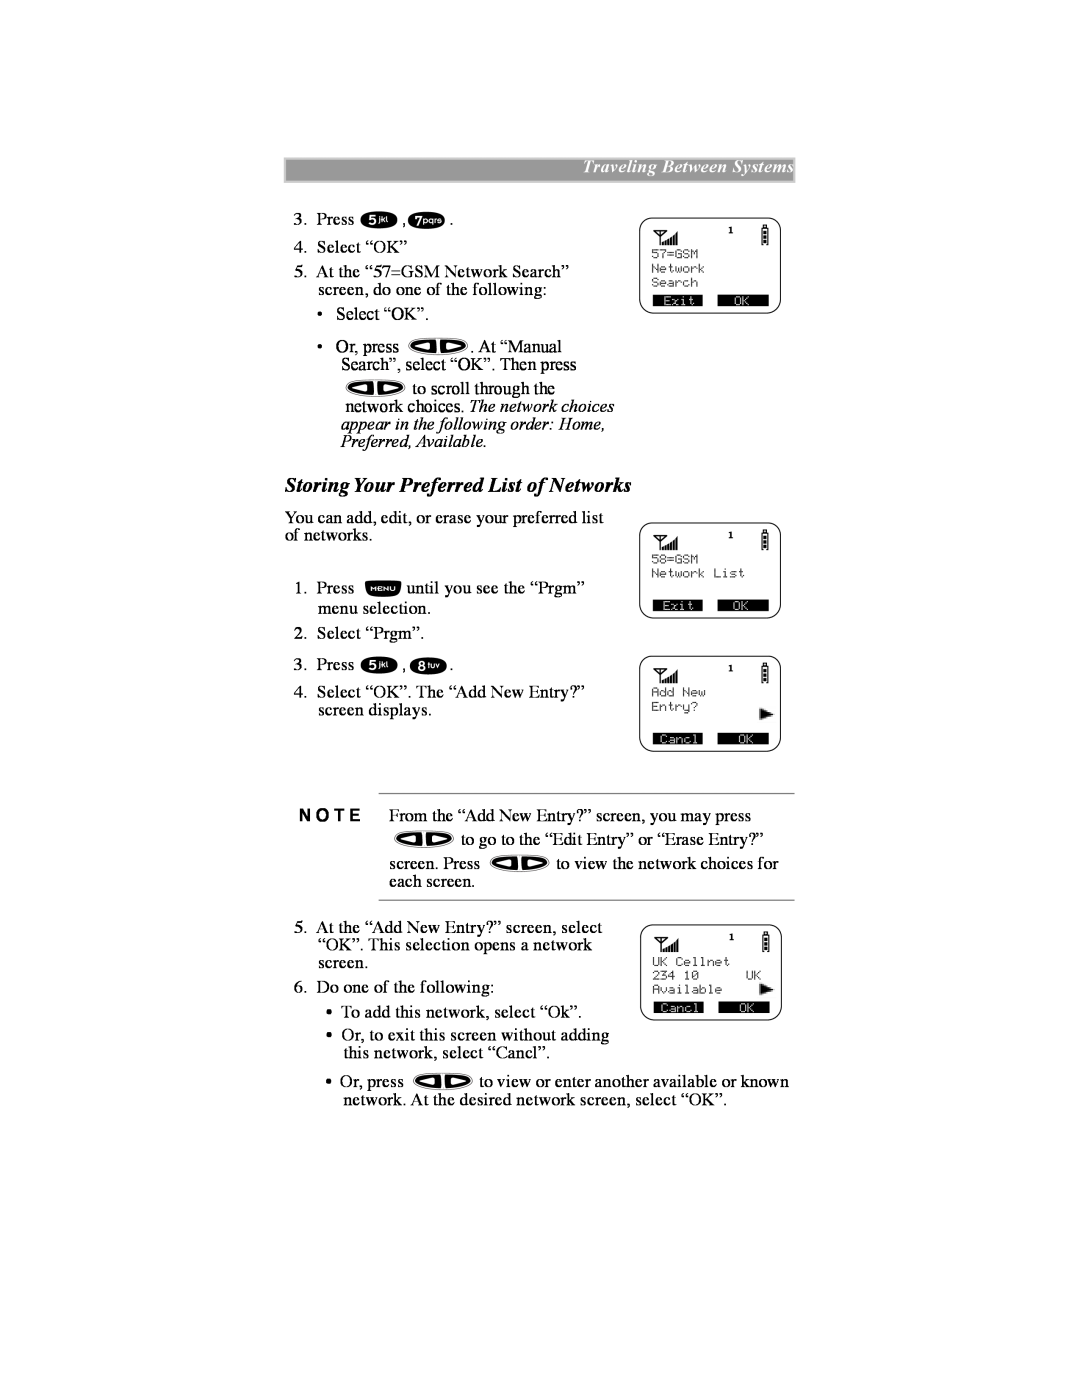 Motorola iDEN manual Storing Your Preferred List of Networks, Traveling Between Systems 